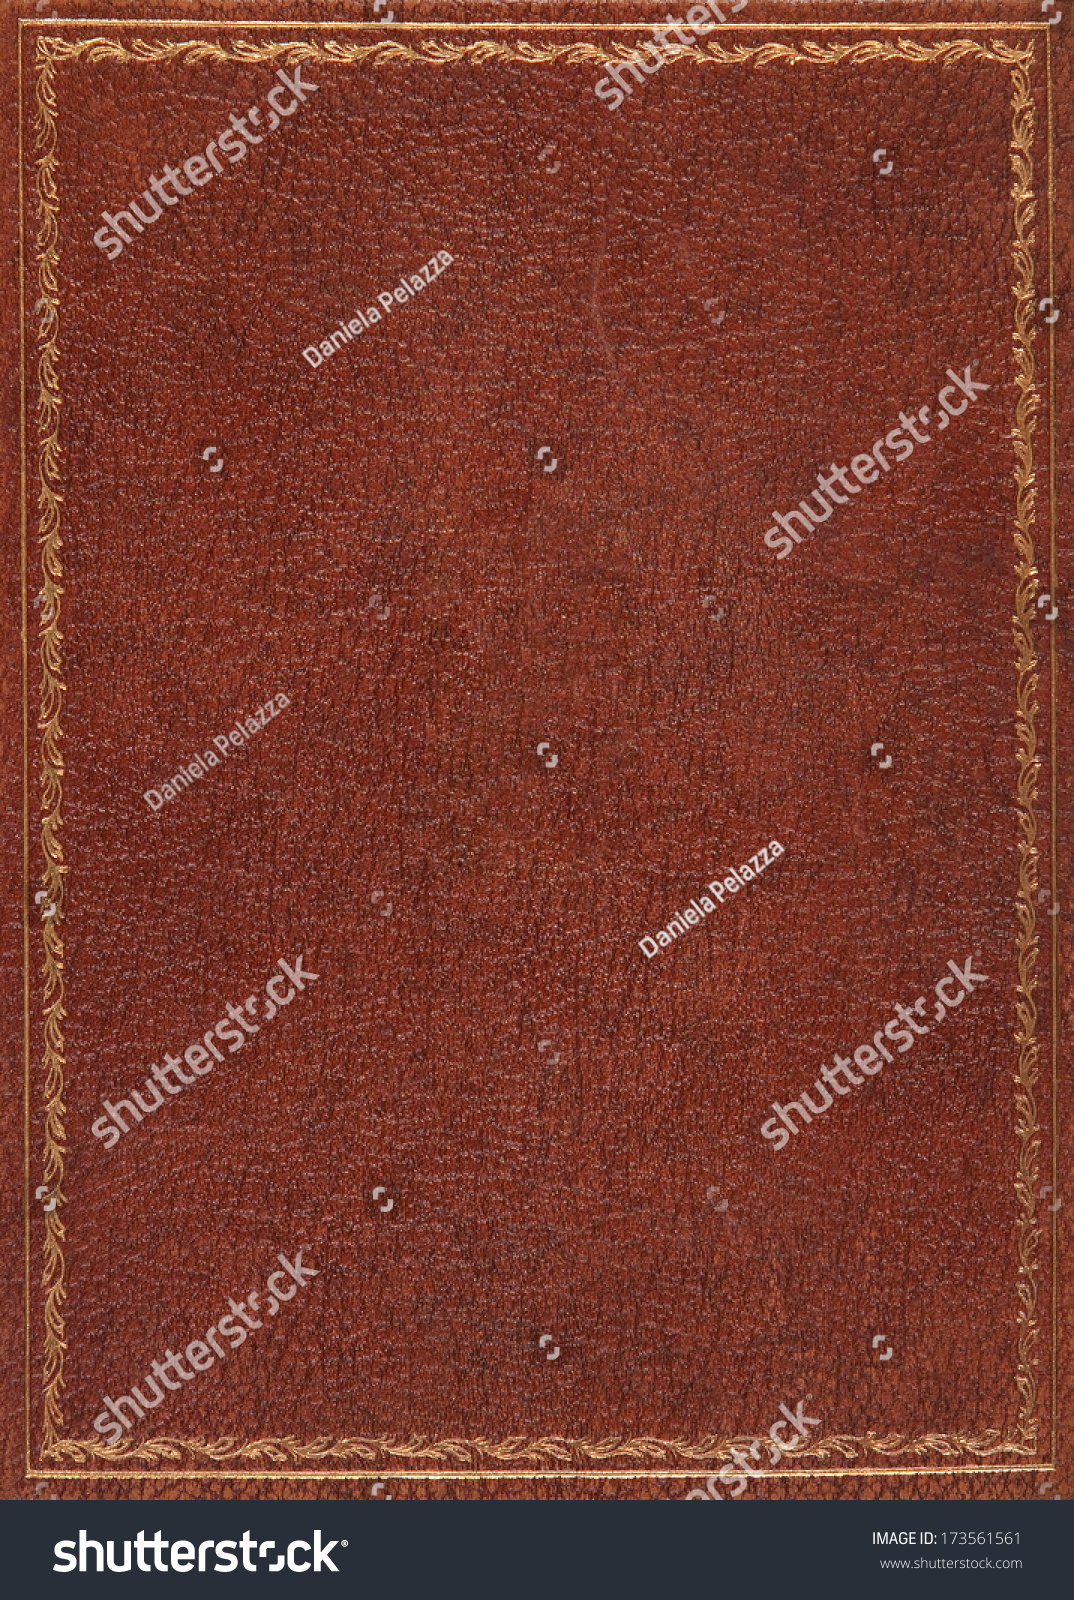 Brown leather book cover #173561561